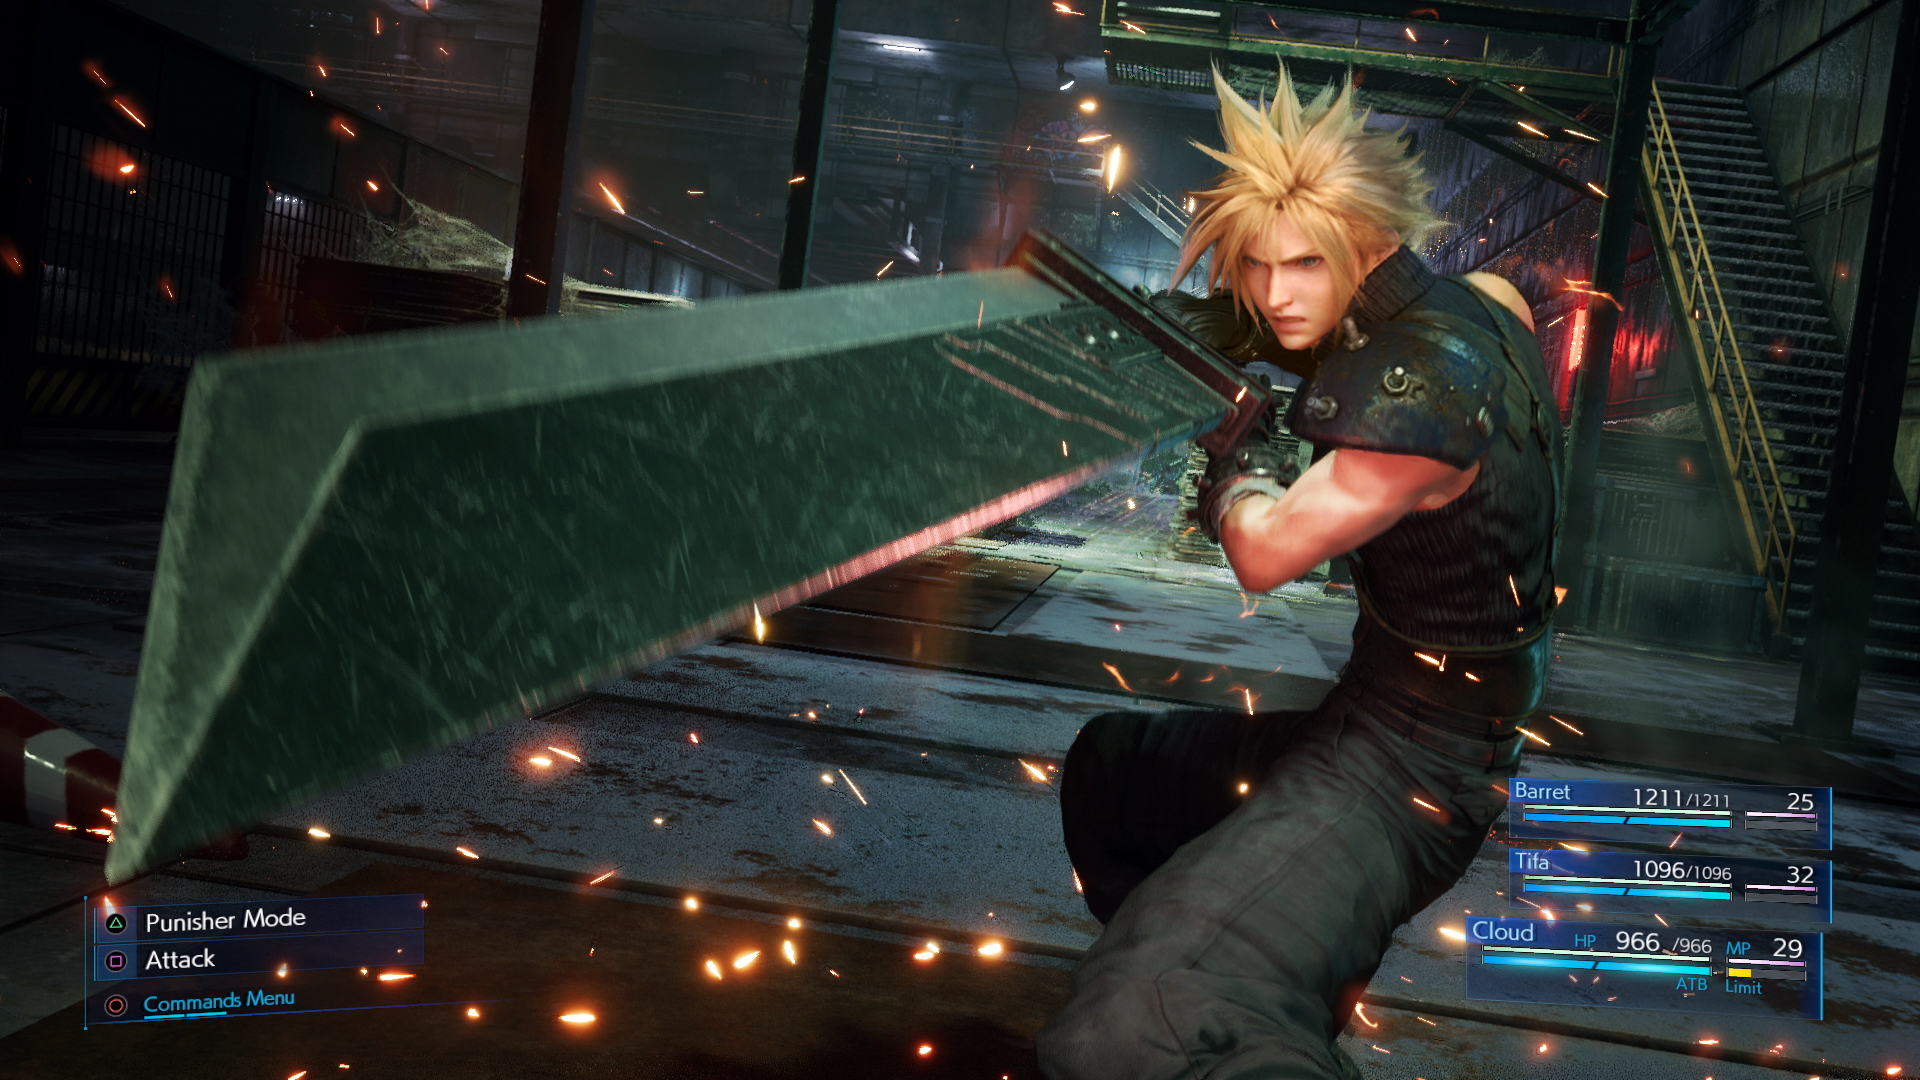 Is Final Fantasy VII Remake Releasing For PC?